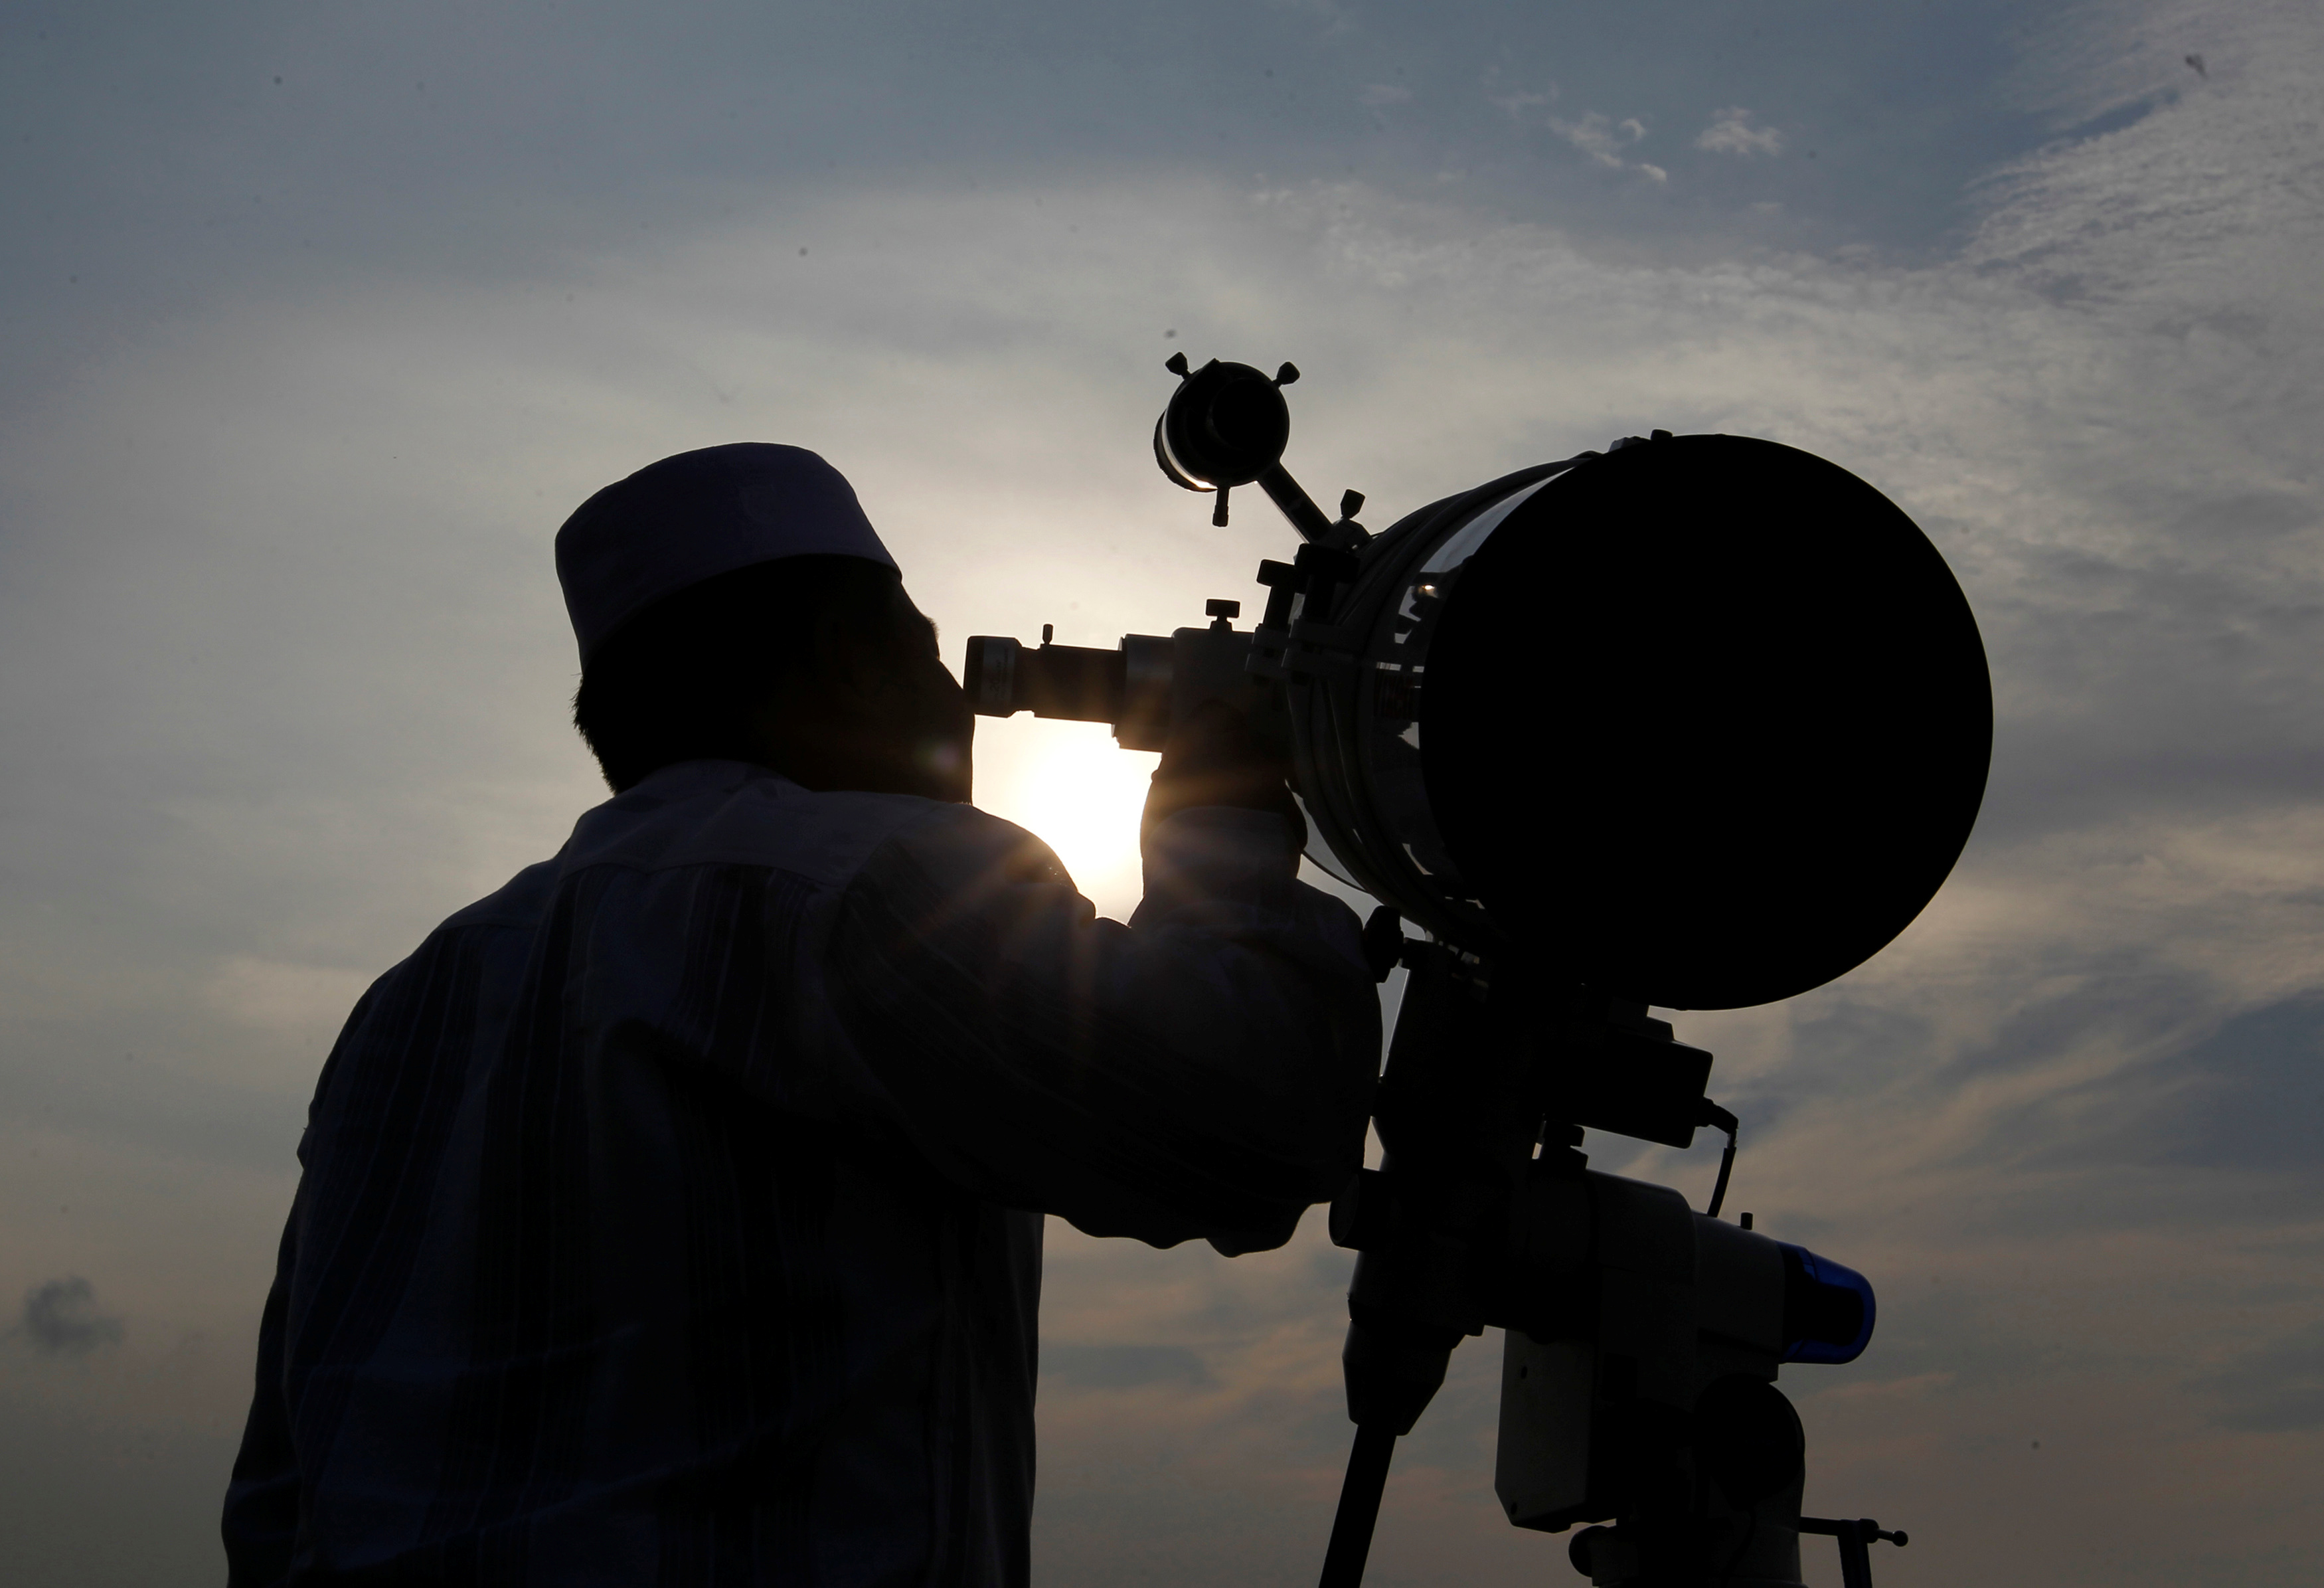 A Muslim man uses a telescope to observe the moon before the Muslim holy month of Ramadan at Al-Musyari'in mosque in Jakarta